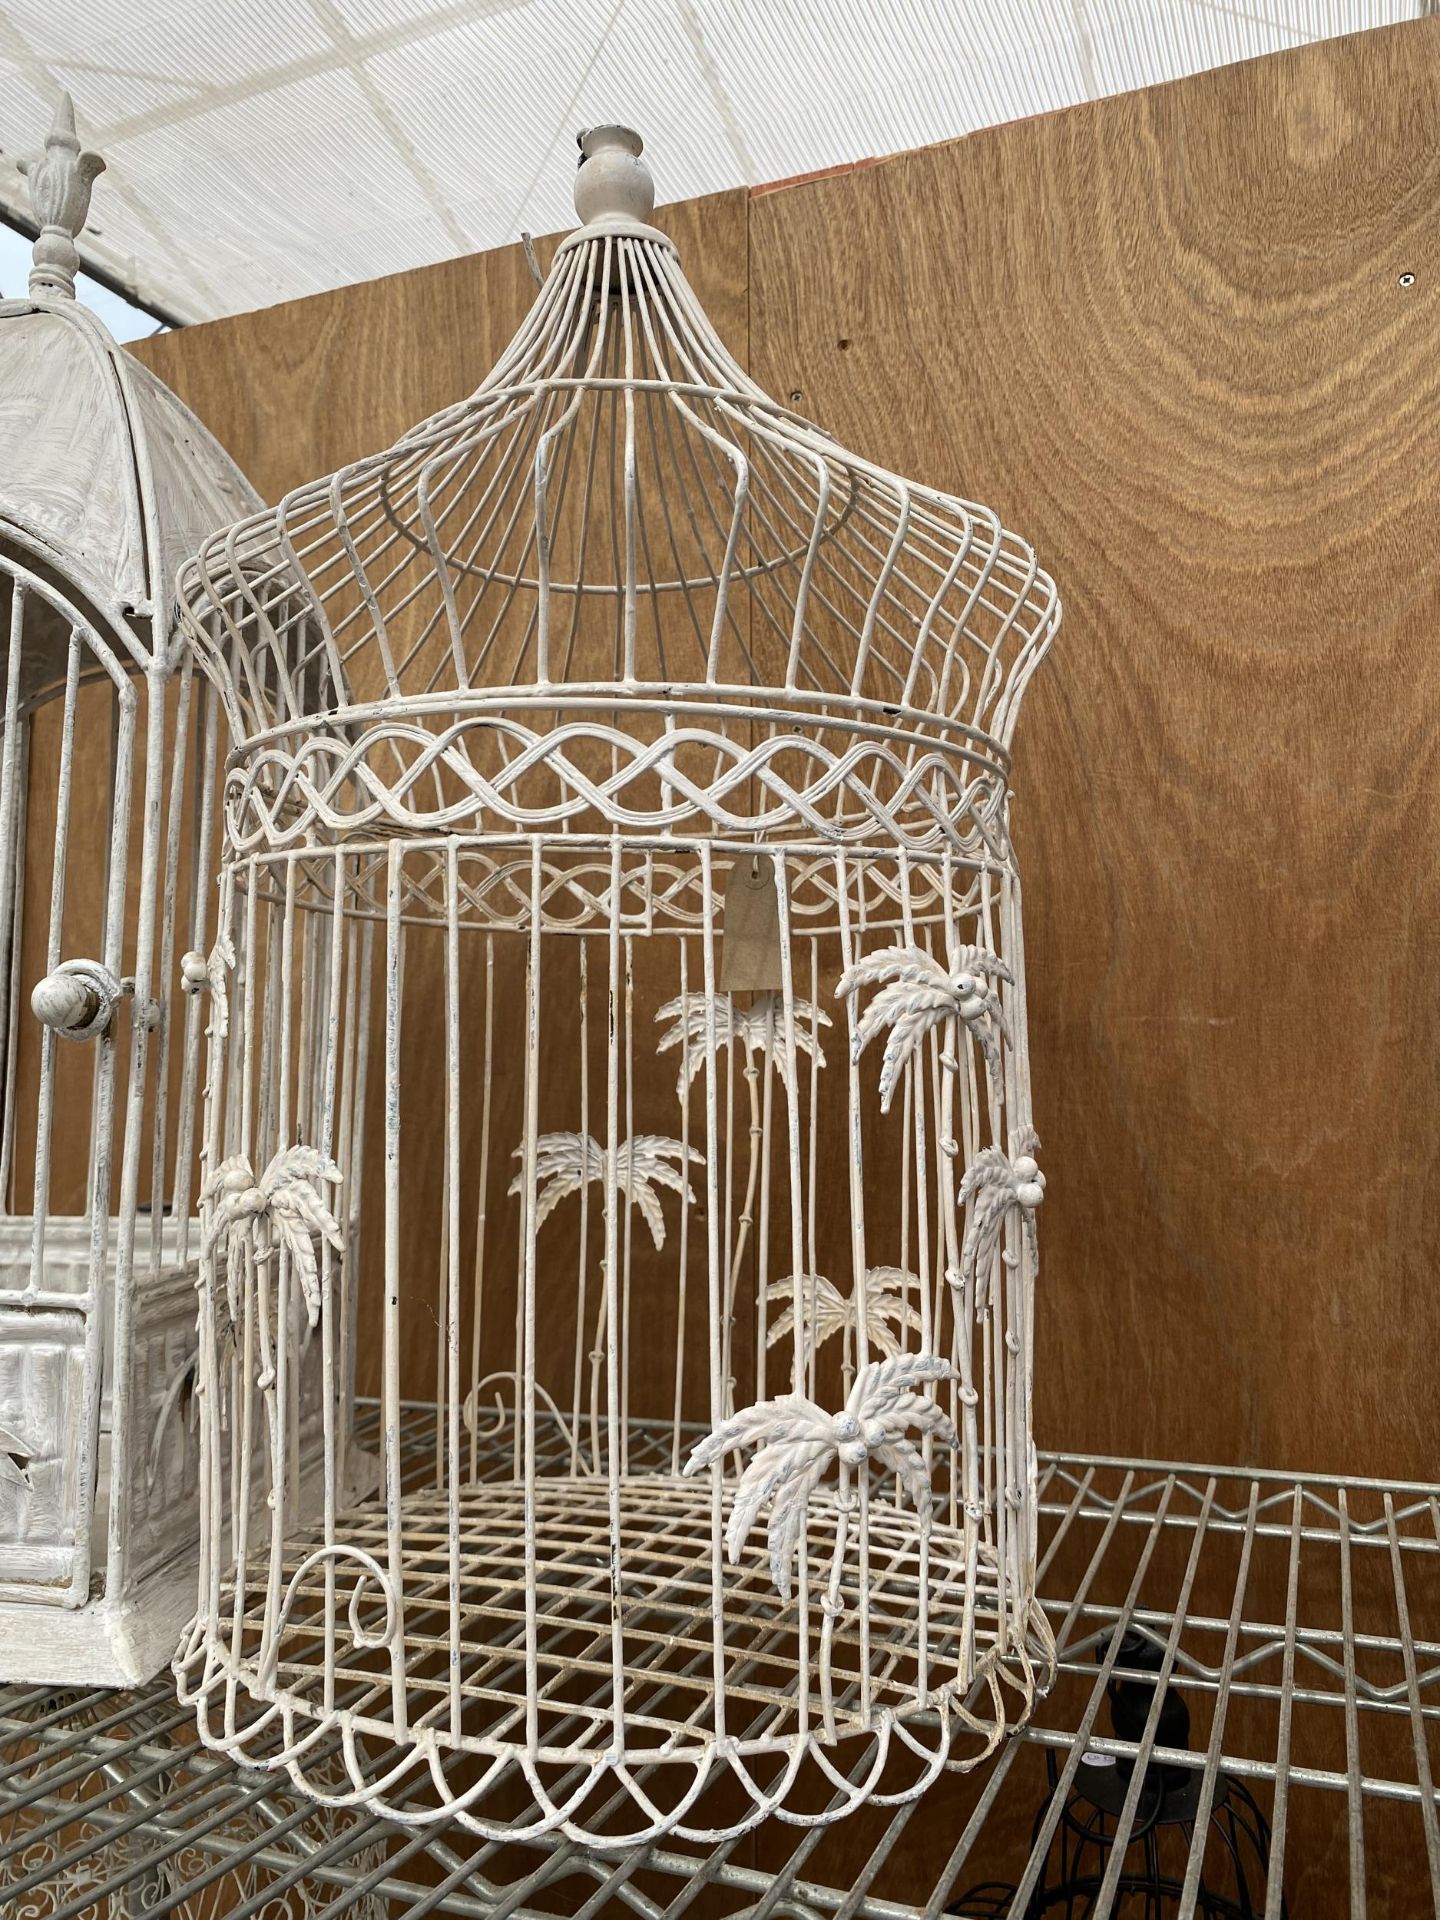 TWO DECORATIVE METAL BIRD CAGES - Image 2 of 5